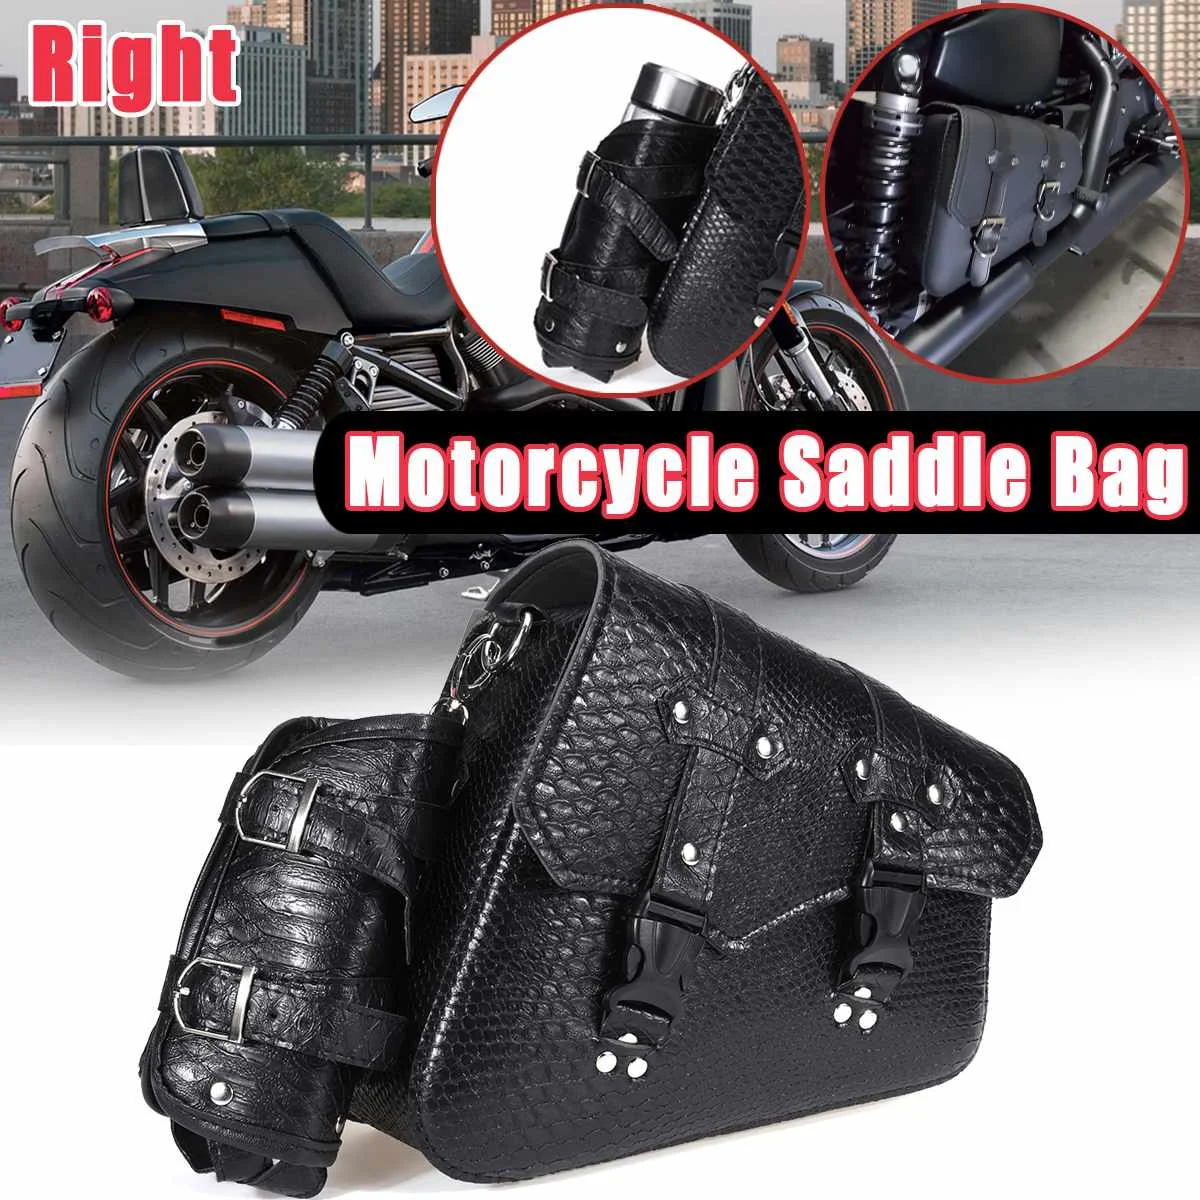 

Motorcycle Saddlebags Crocodile Styling Saddle Bags Tool Luggage Storage Side Pouch PU Leather Black Universal Protective Gears